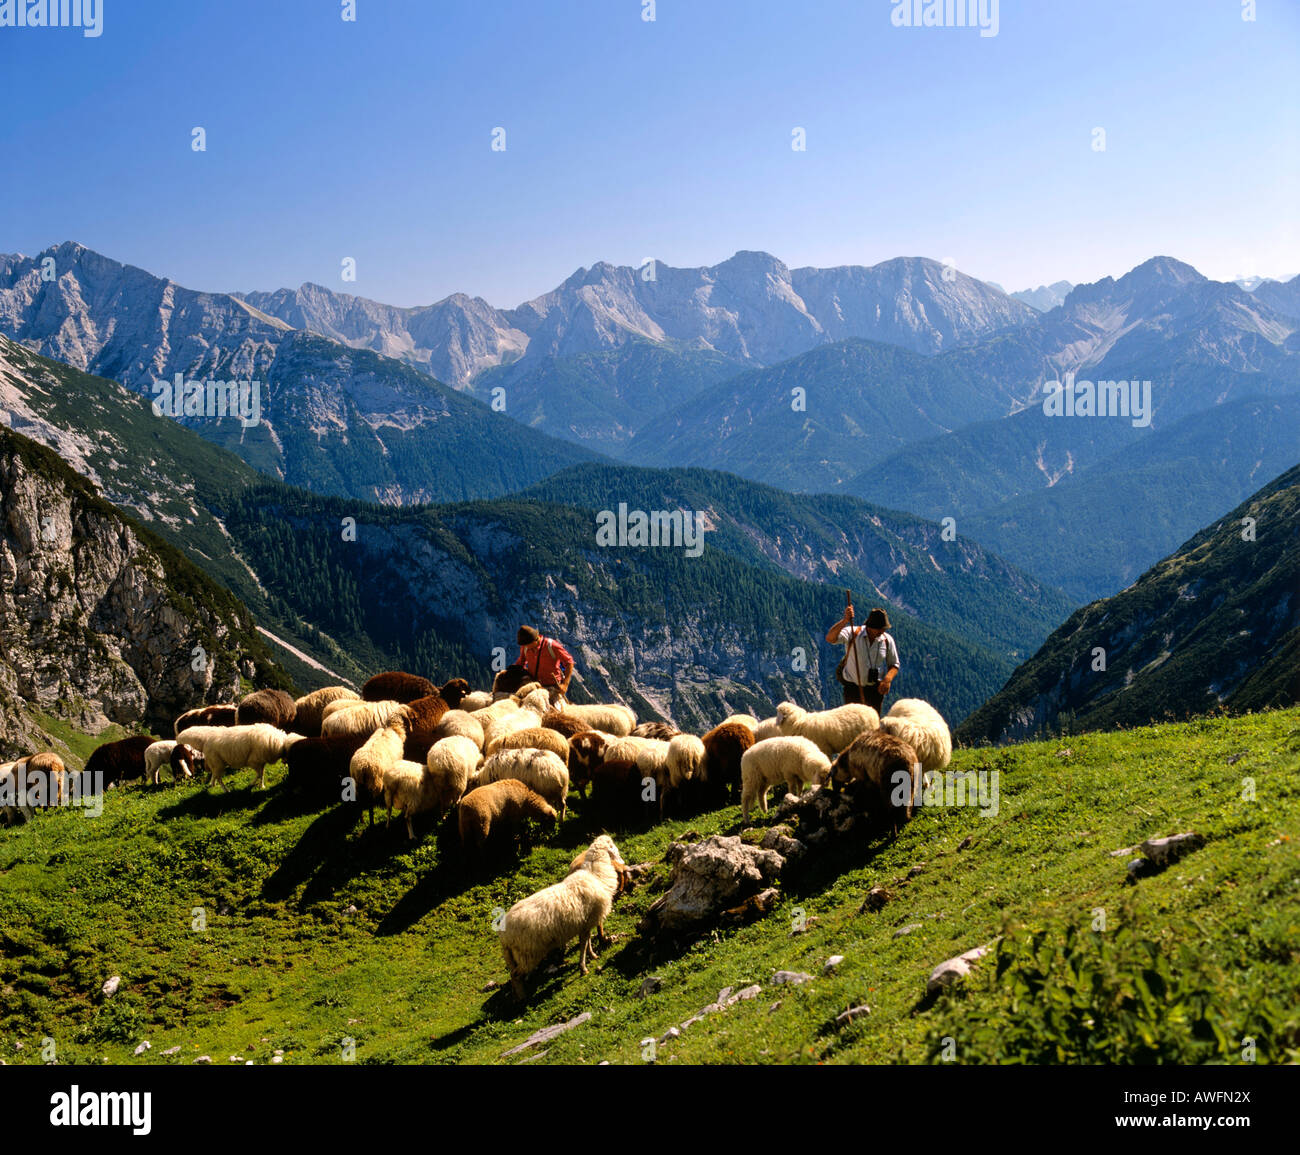 Herd of sheep on an alpine meadow with a view of the Pleissenspitze peak (left), Sollsteine (middle) and the Erlspitze peak (ri Stock Photo